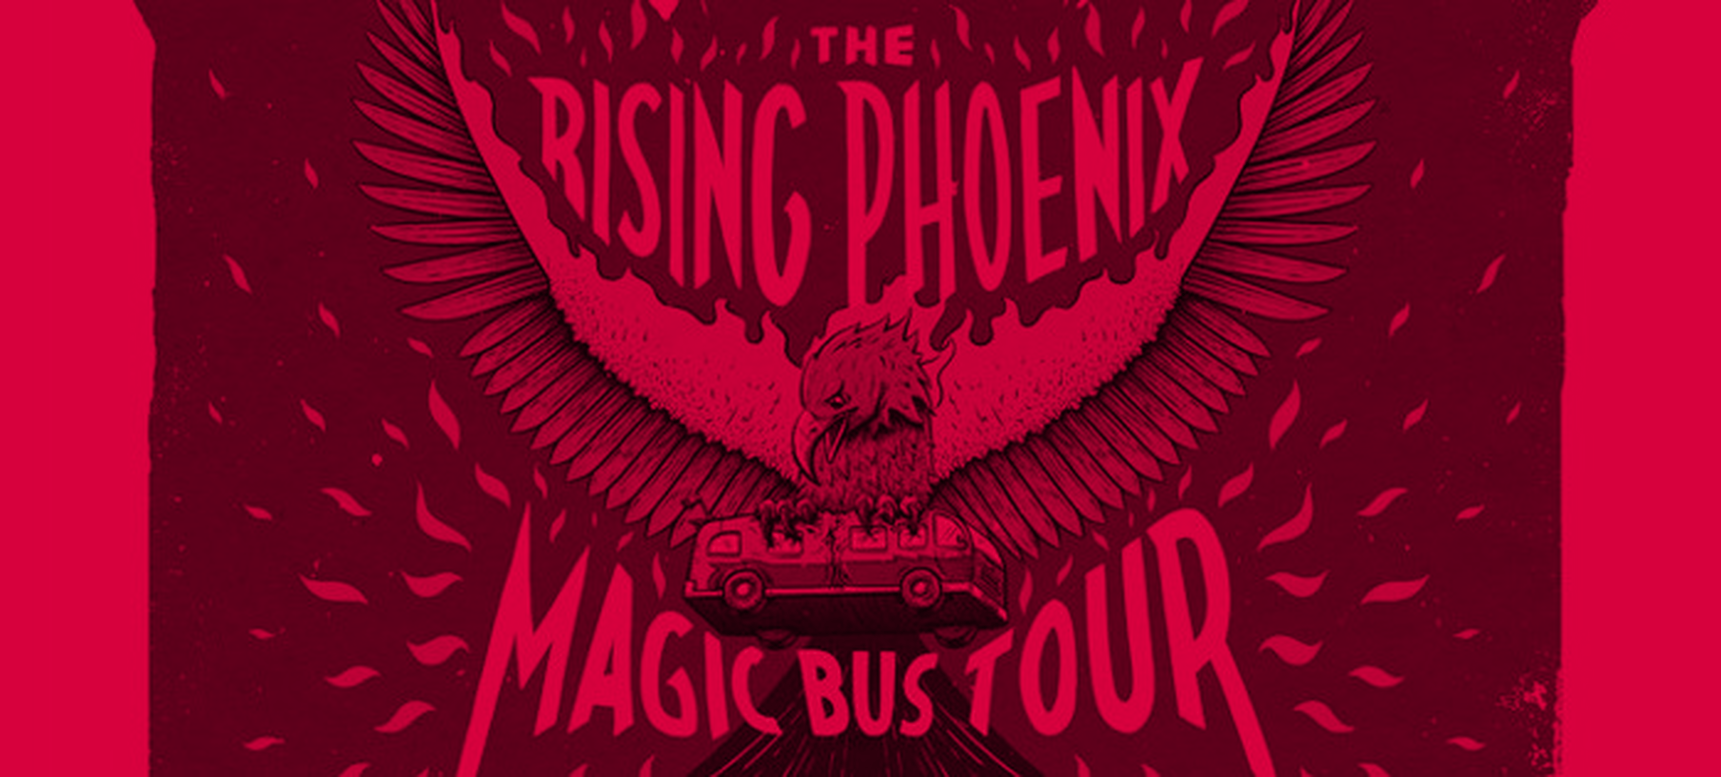 Phoenix Mixed with Red Bull Logo - The Rising Phoenix Magic Bus Tour | Red Bull Studios Cape Town